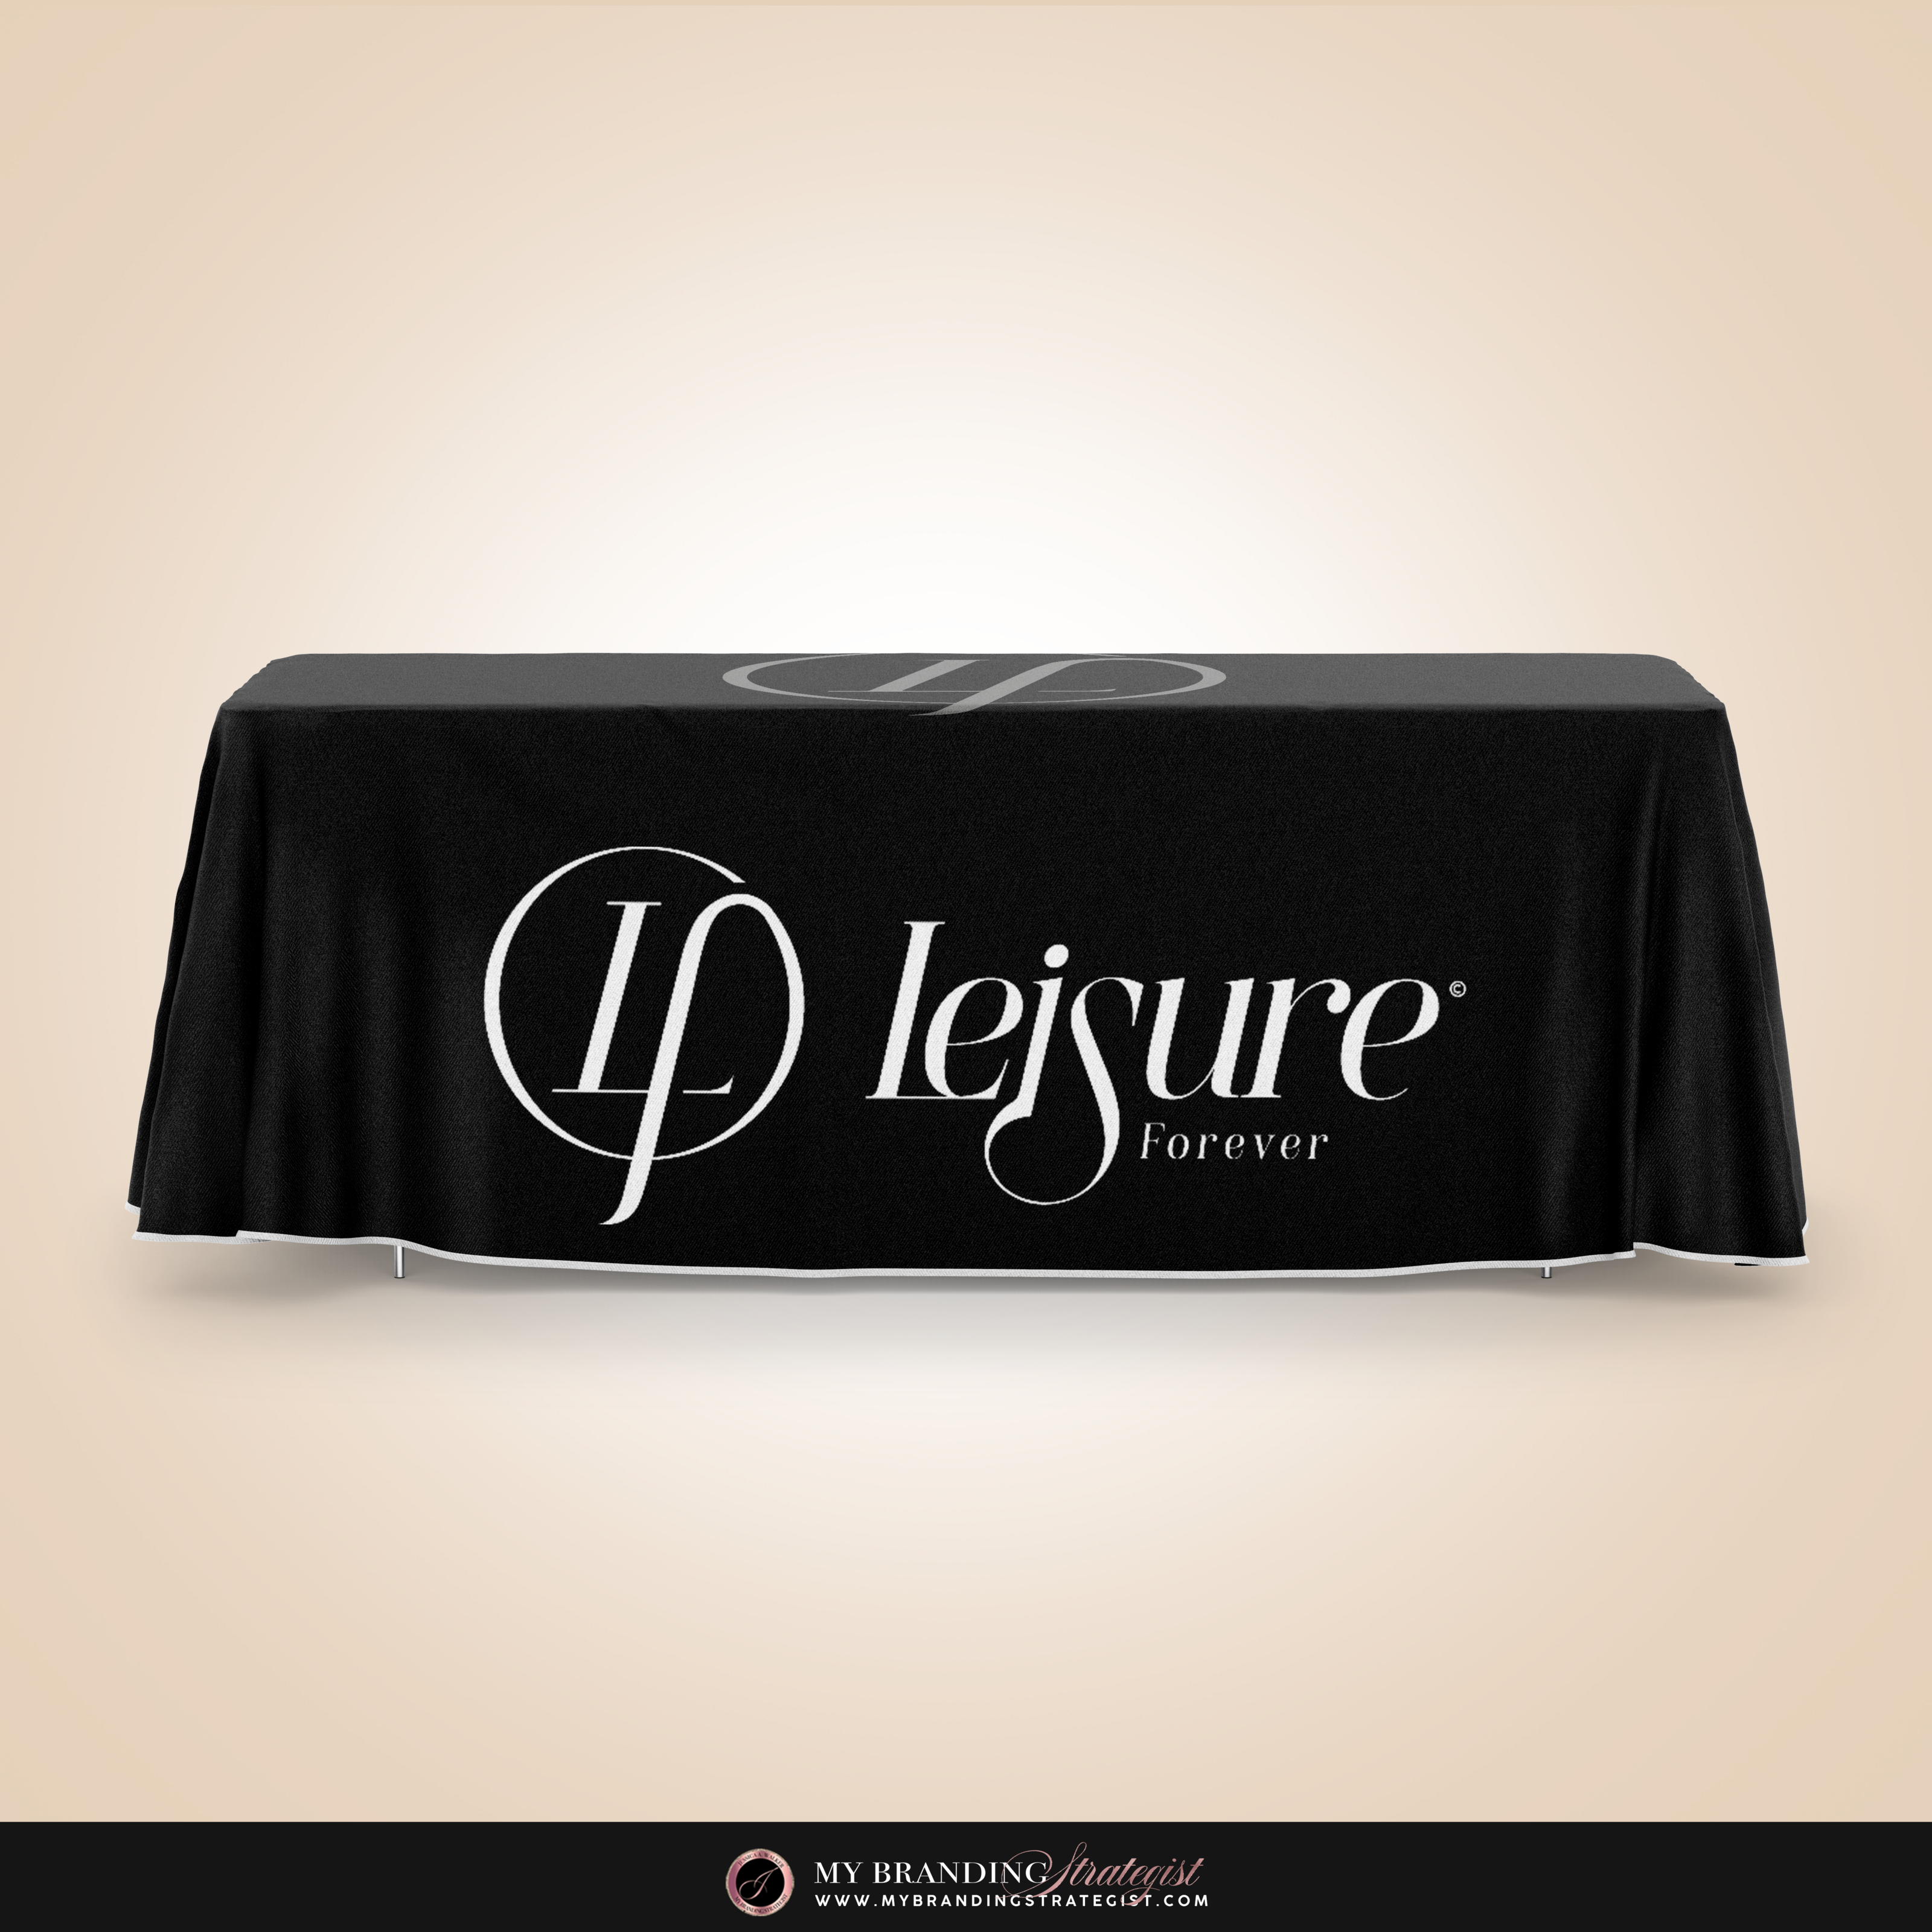 MOCKUP - TABLECLOTH - LEISURE FOREVER